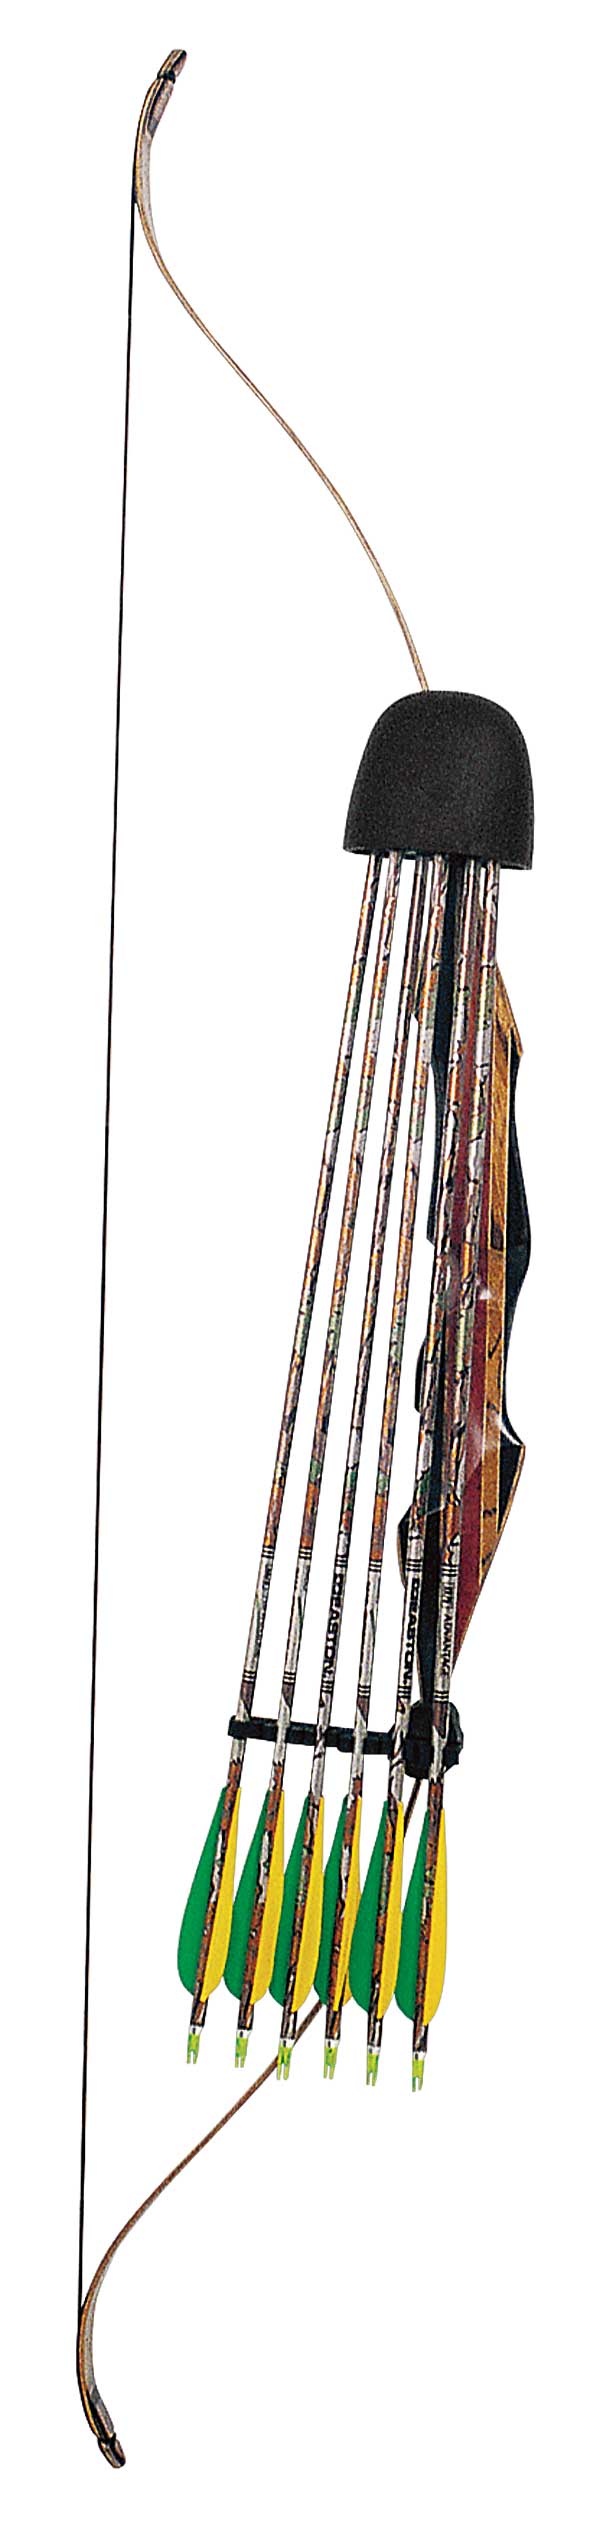 traditional archery quiver and arrows